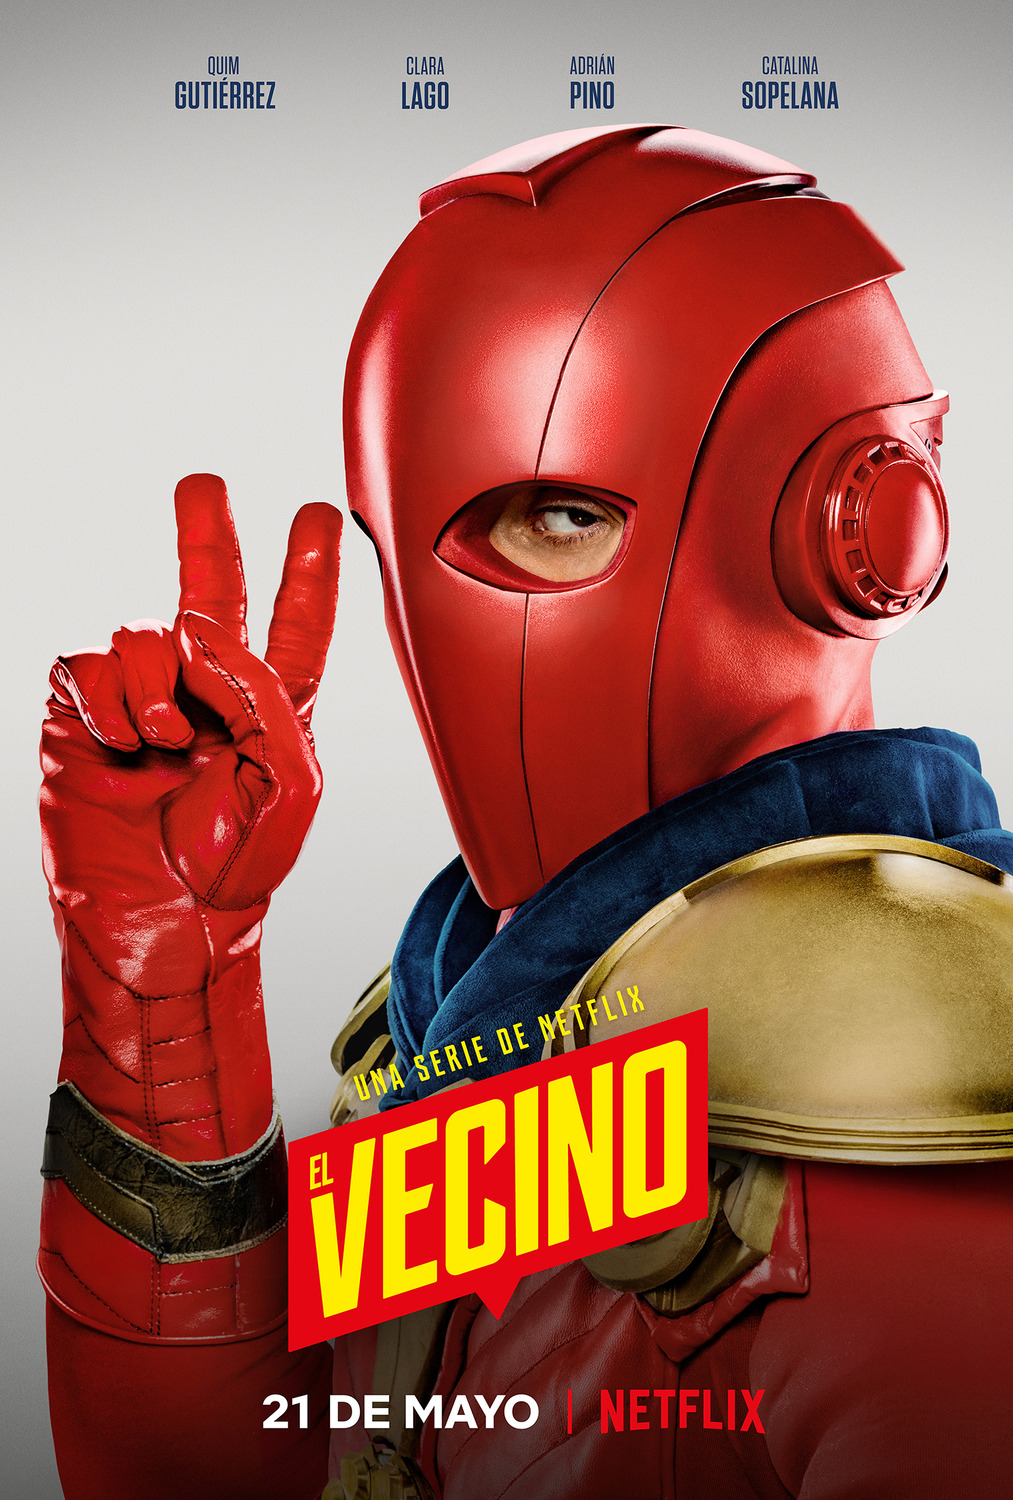 Extra Large TV Poster Image for El vecino (#3 of 9)